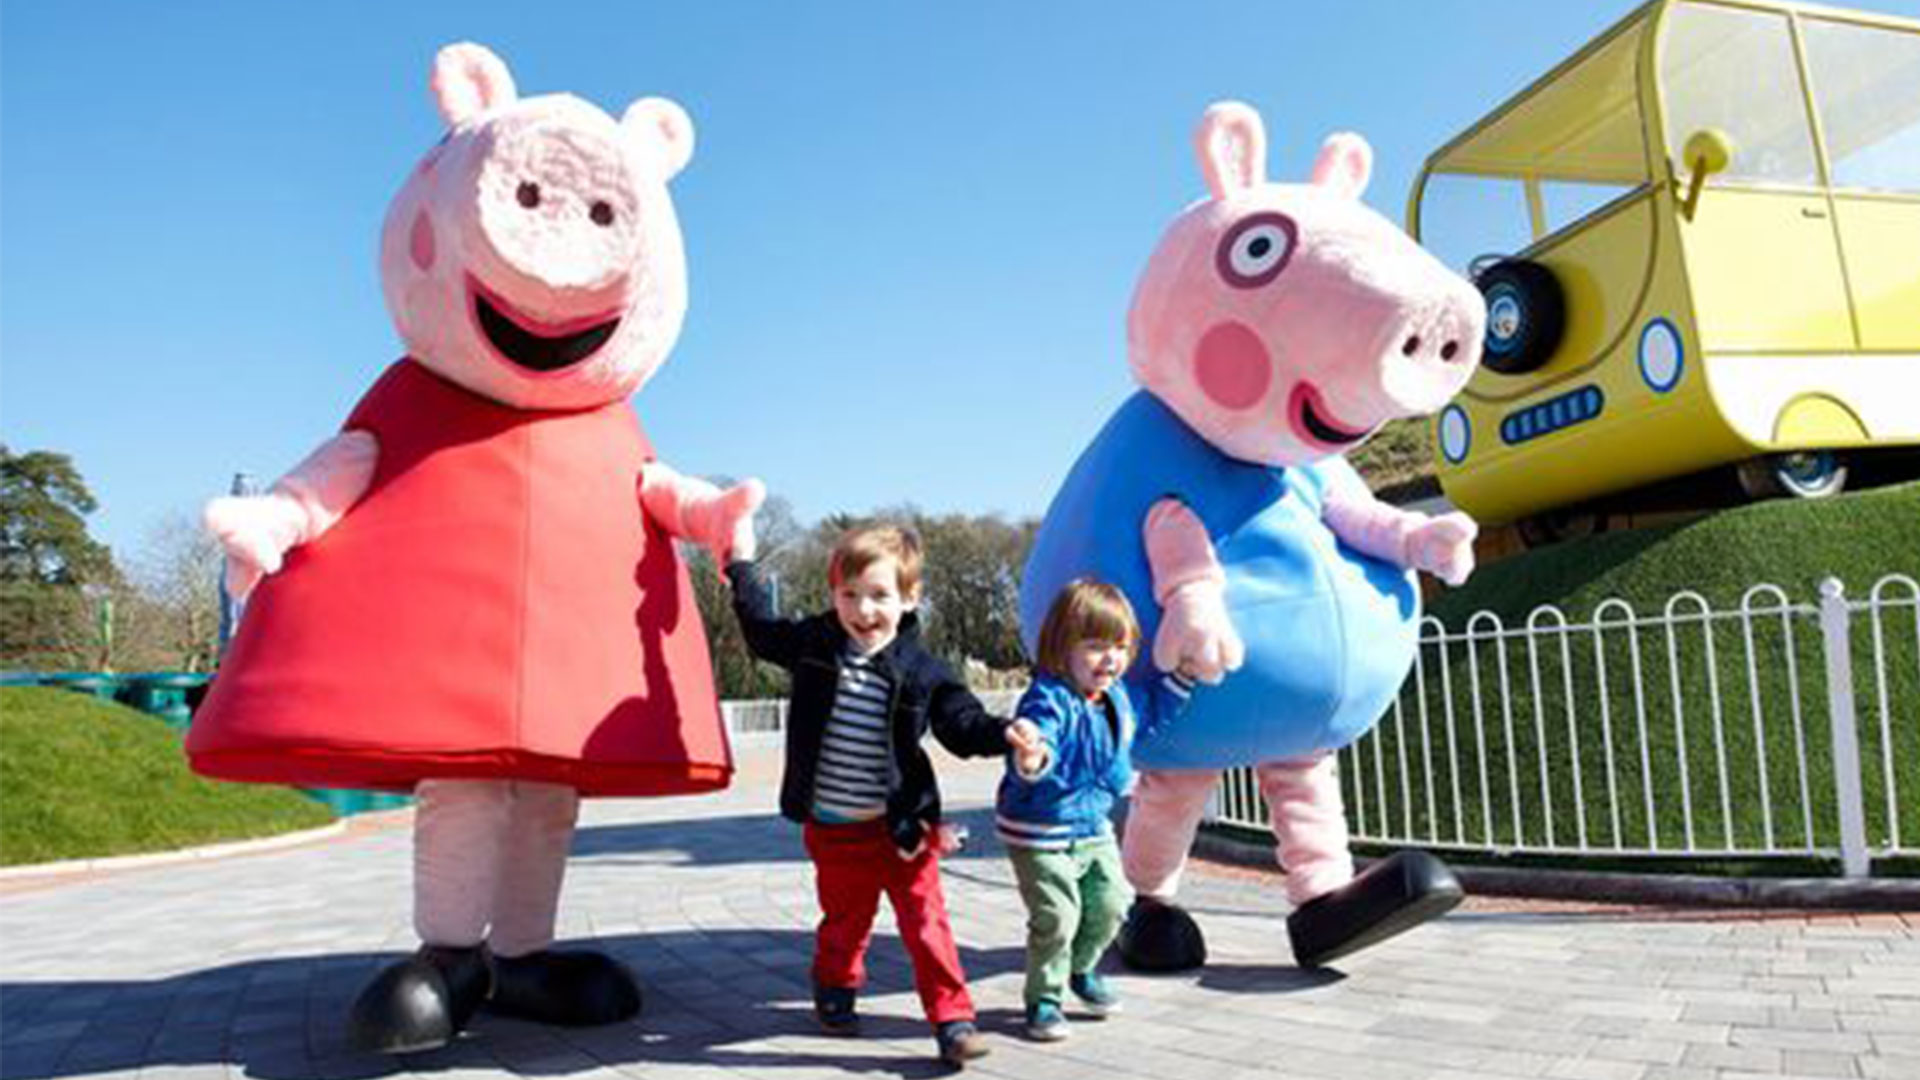 New Peppa Pig attraction to open in the UK - and kids can meet her too